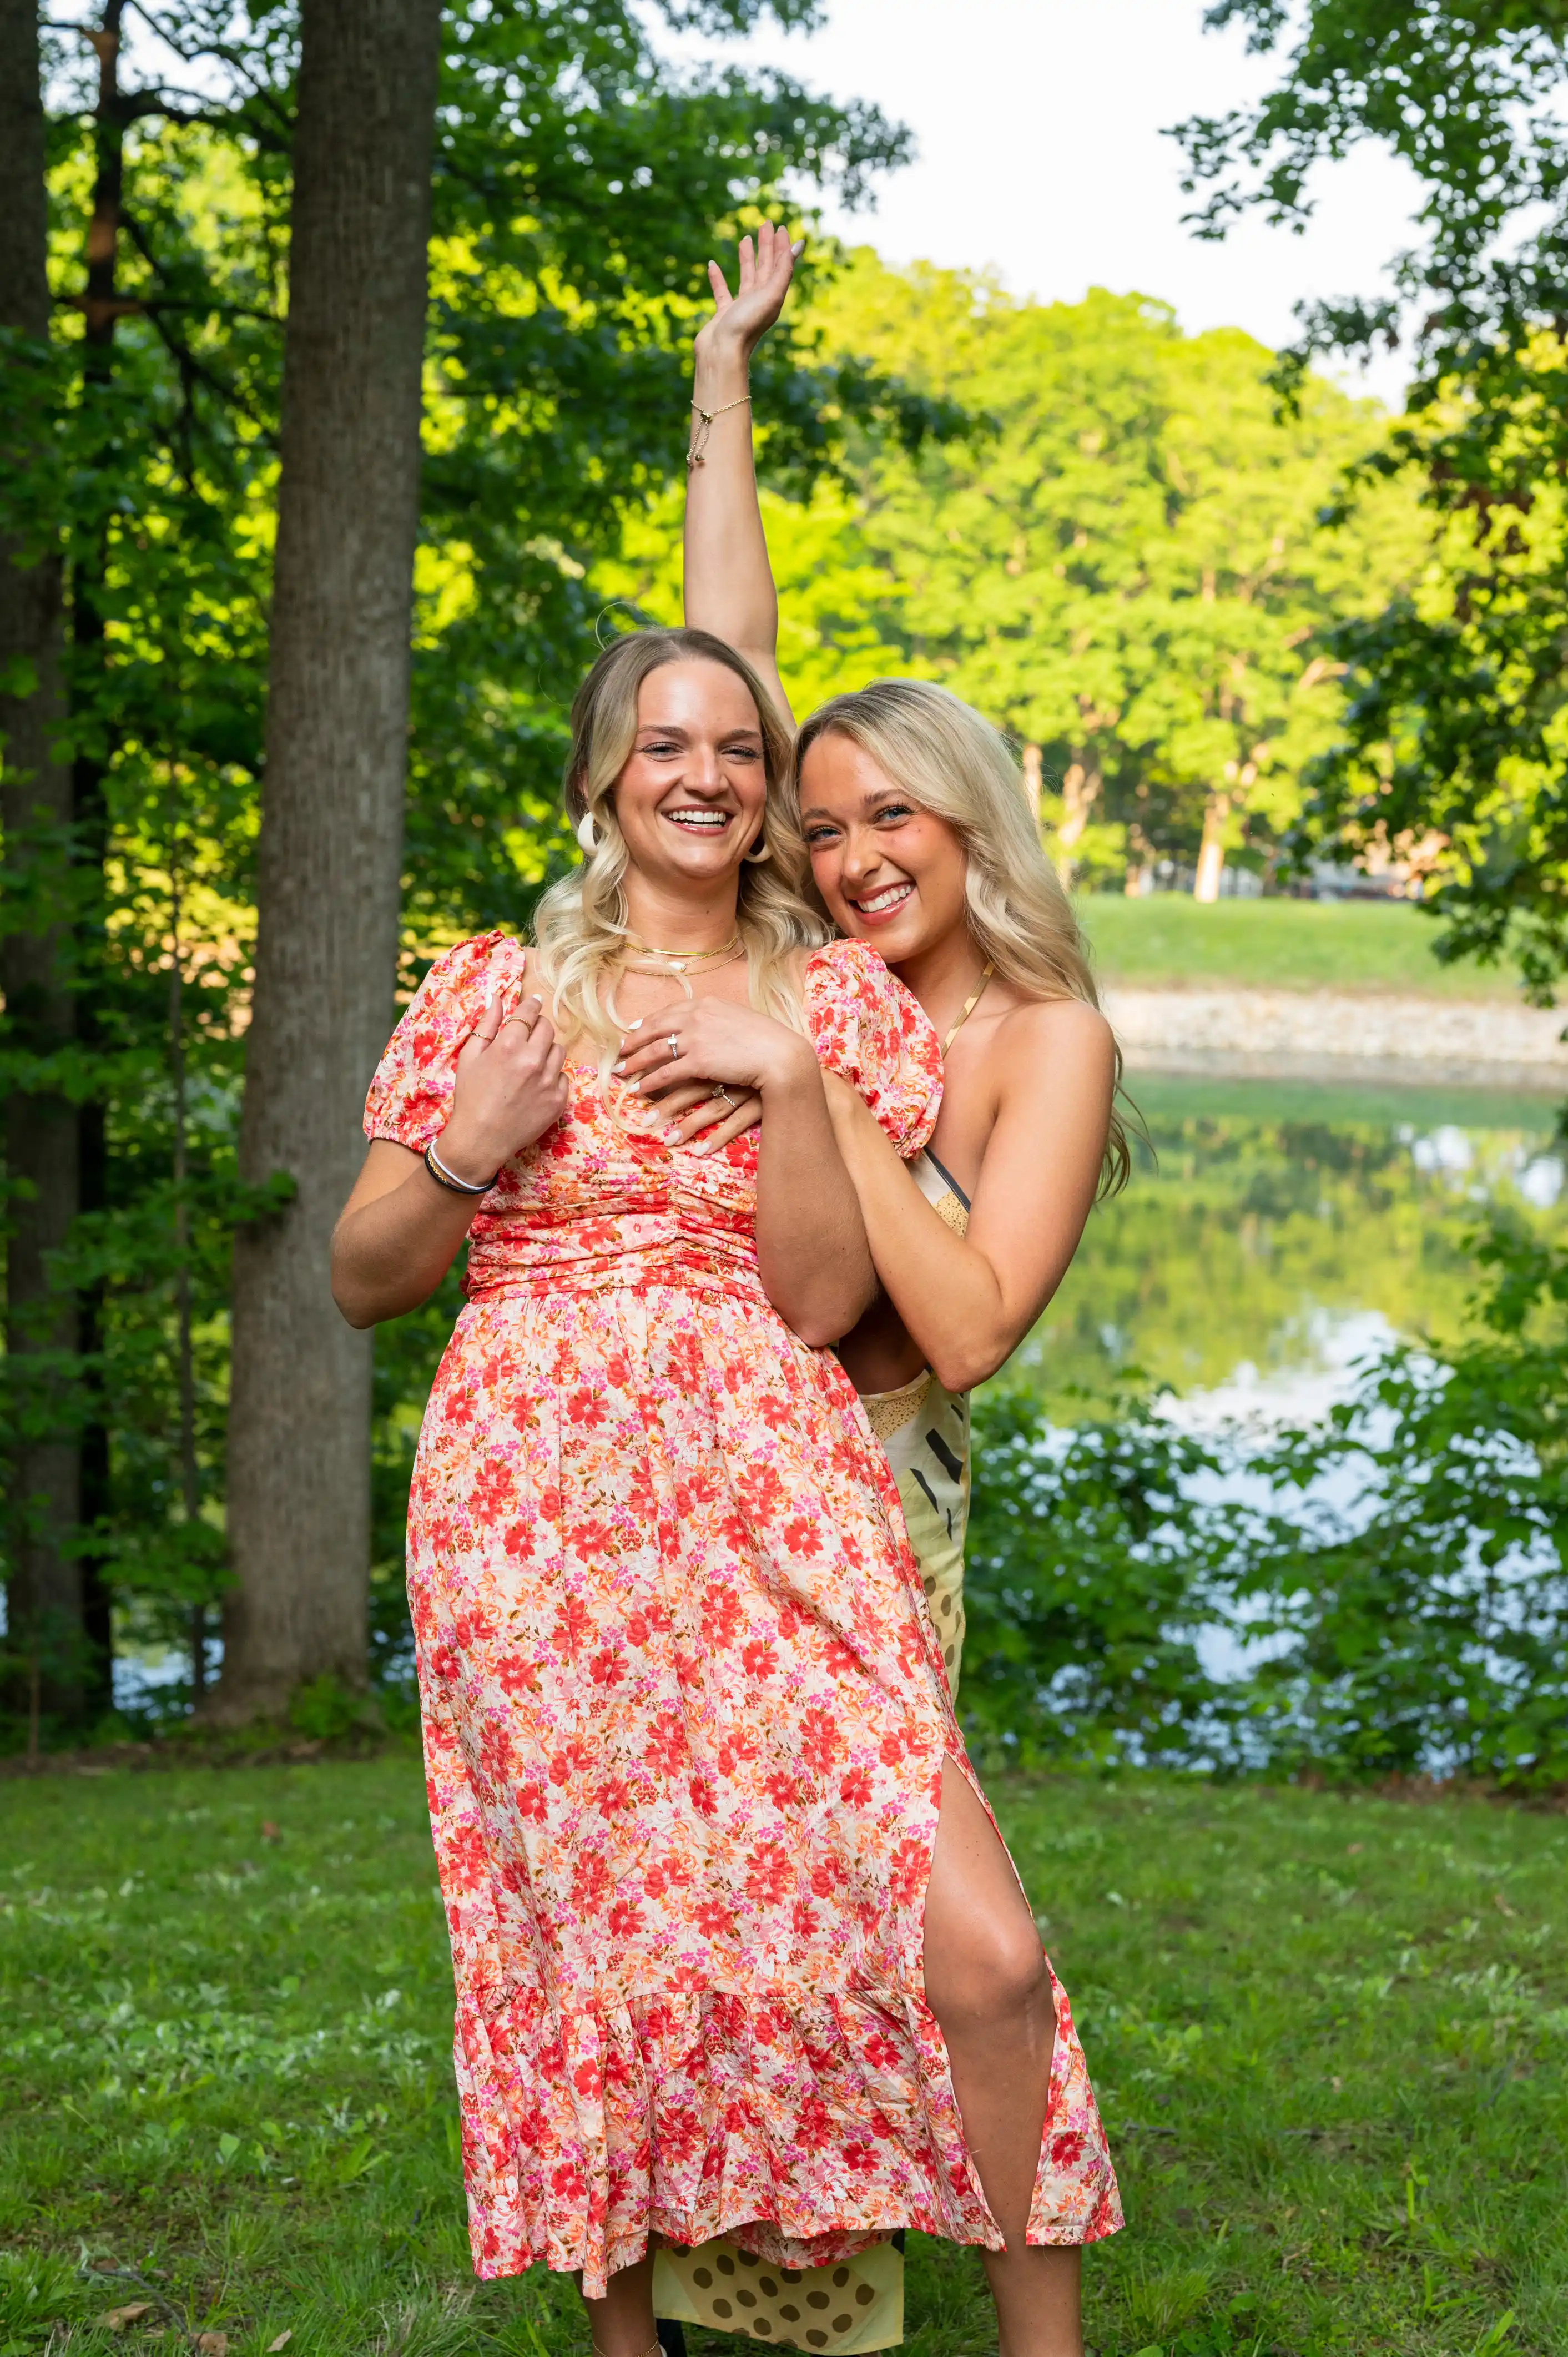 Two women smiling and hugging each other in a park with trees and a pond in the background. They are both wearing floral dresses.